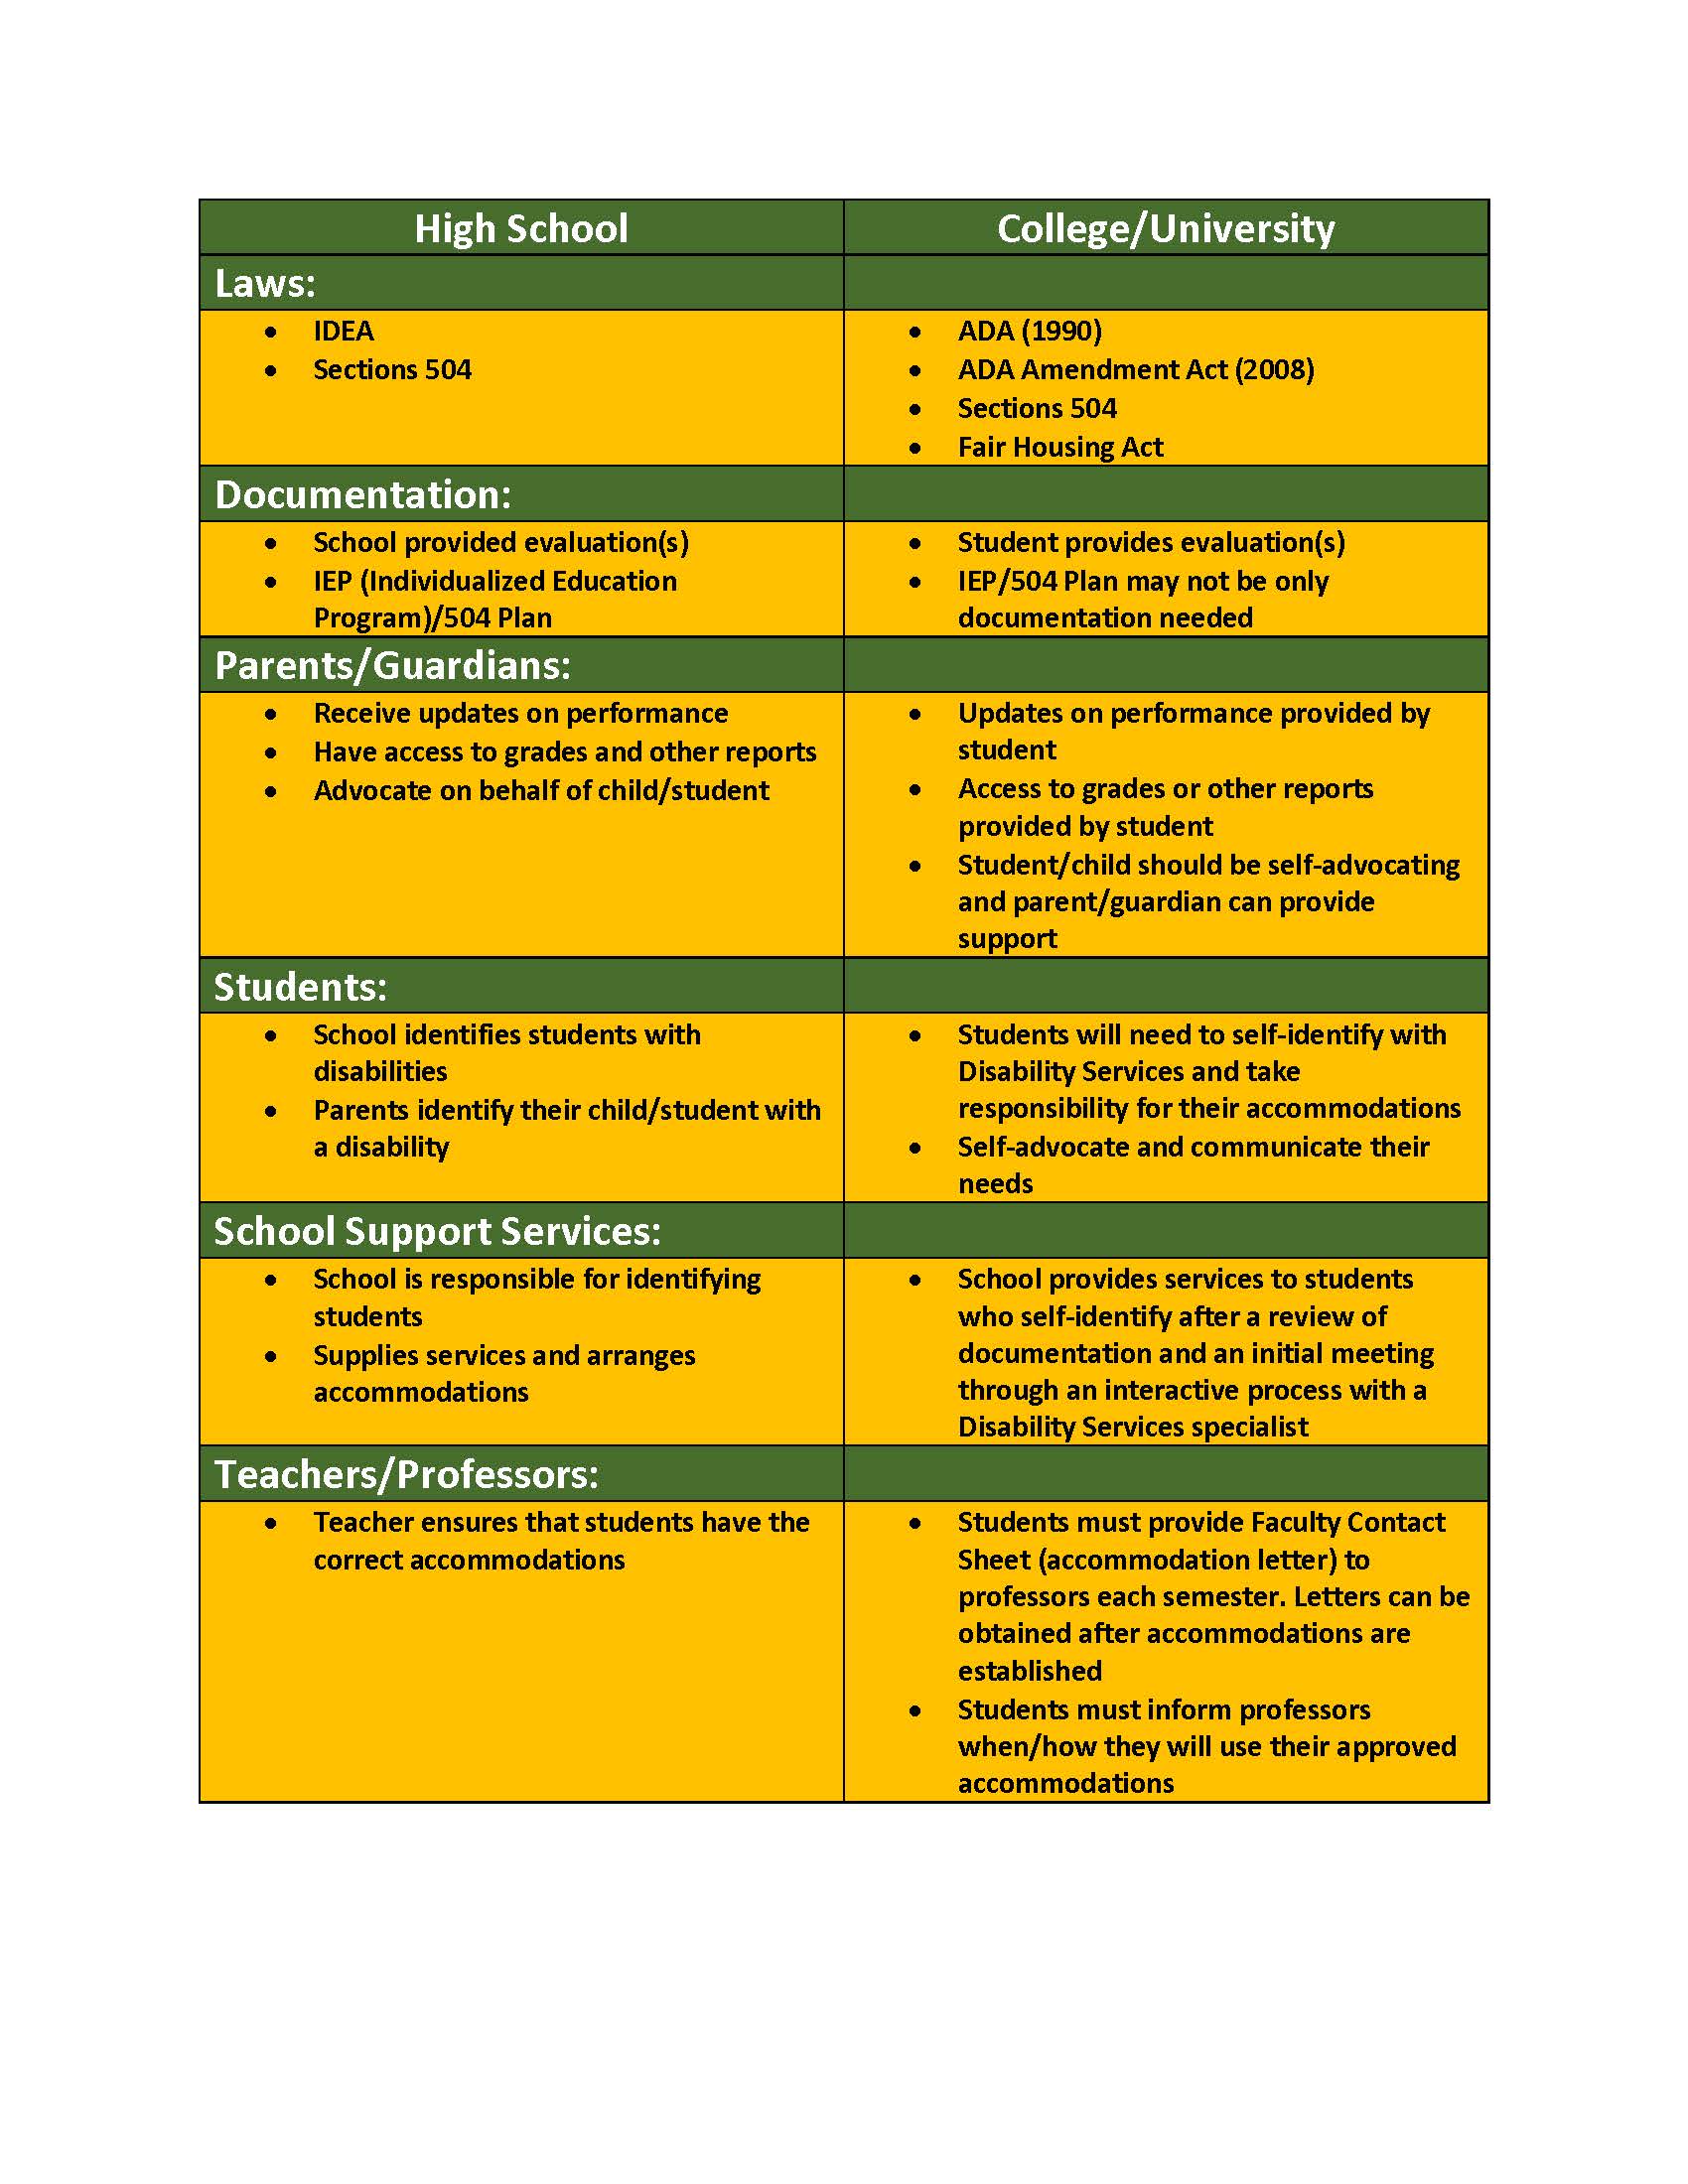 Image of a chart that shows the difference between High school vs college accommodations. Tells the difference in laws, documentation needed, parents/families roles, students roles, support services, and instructors roles.